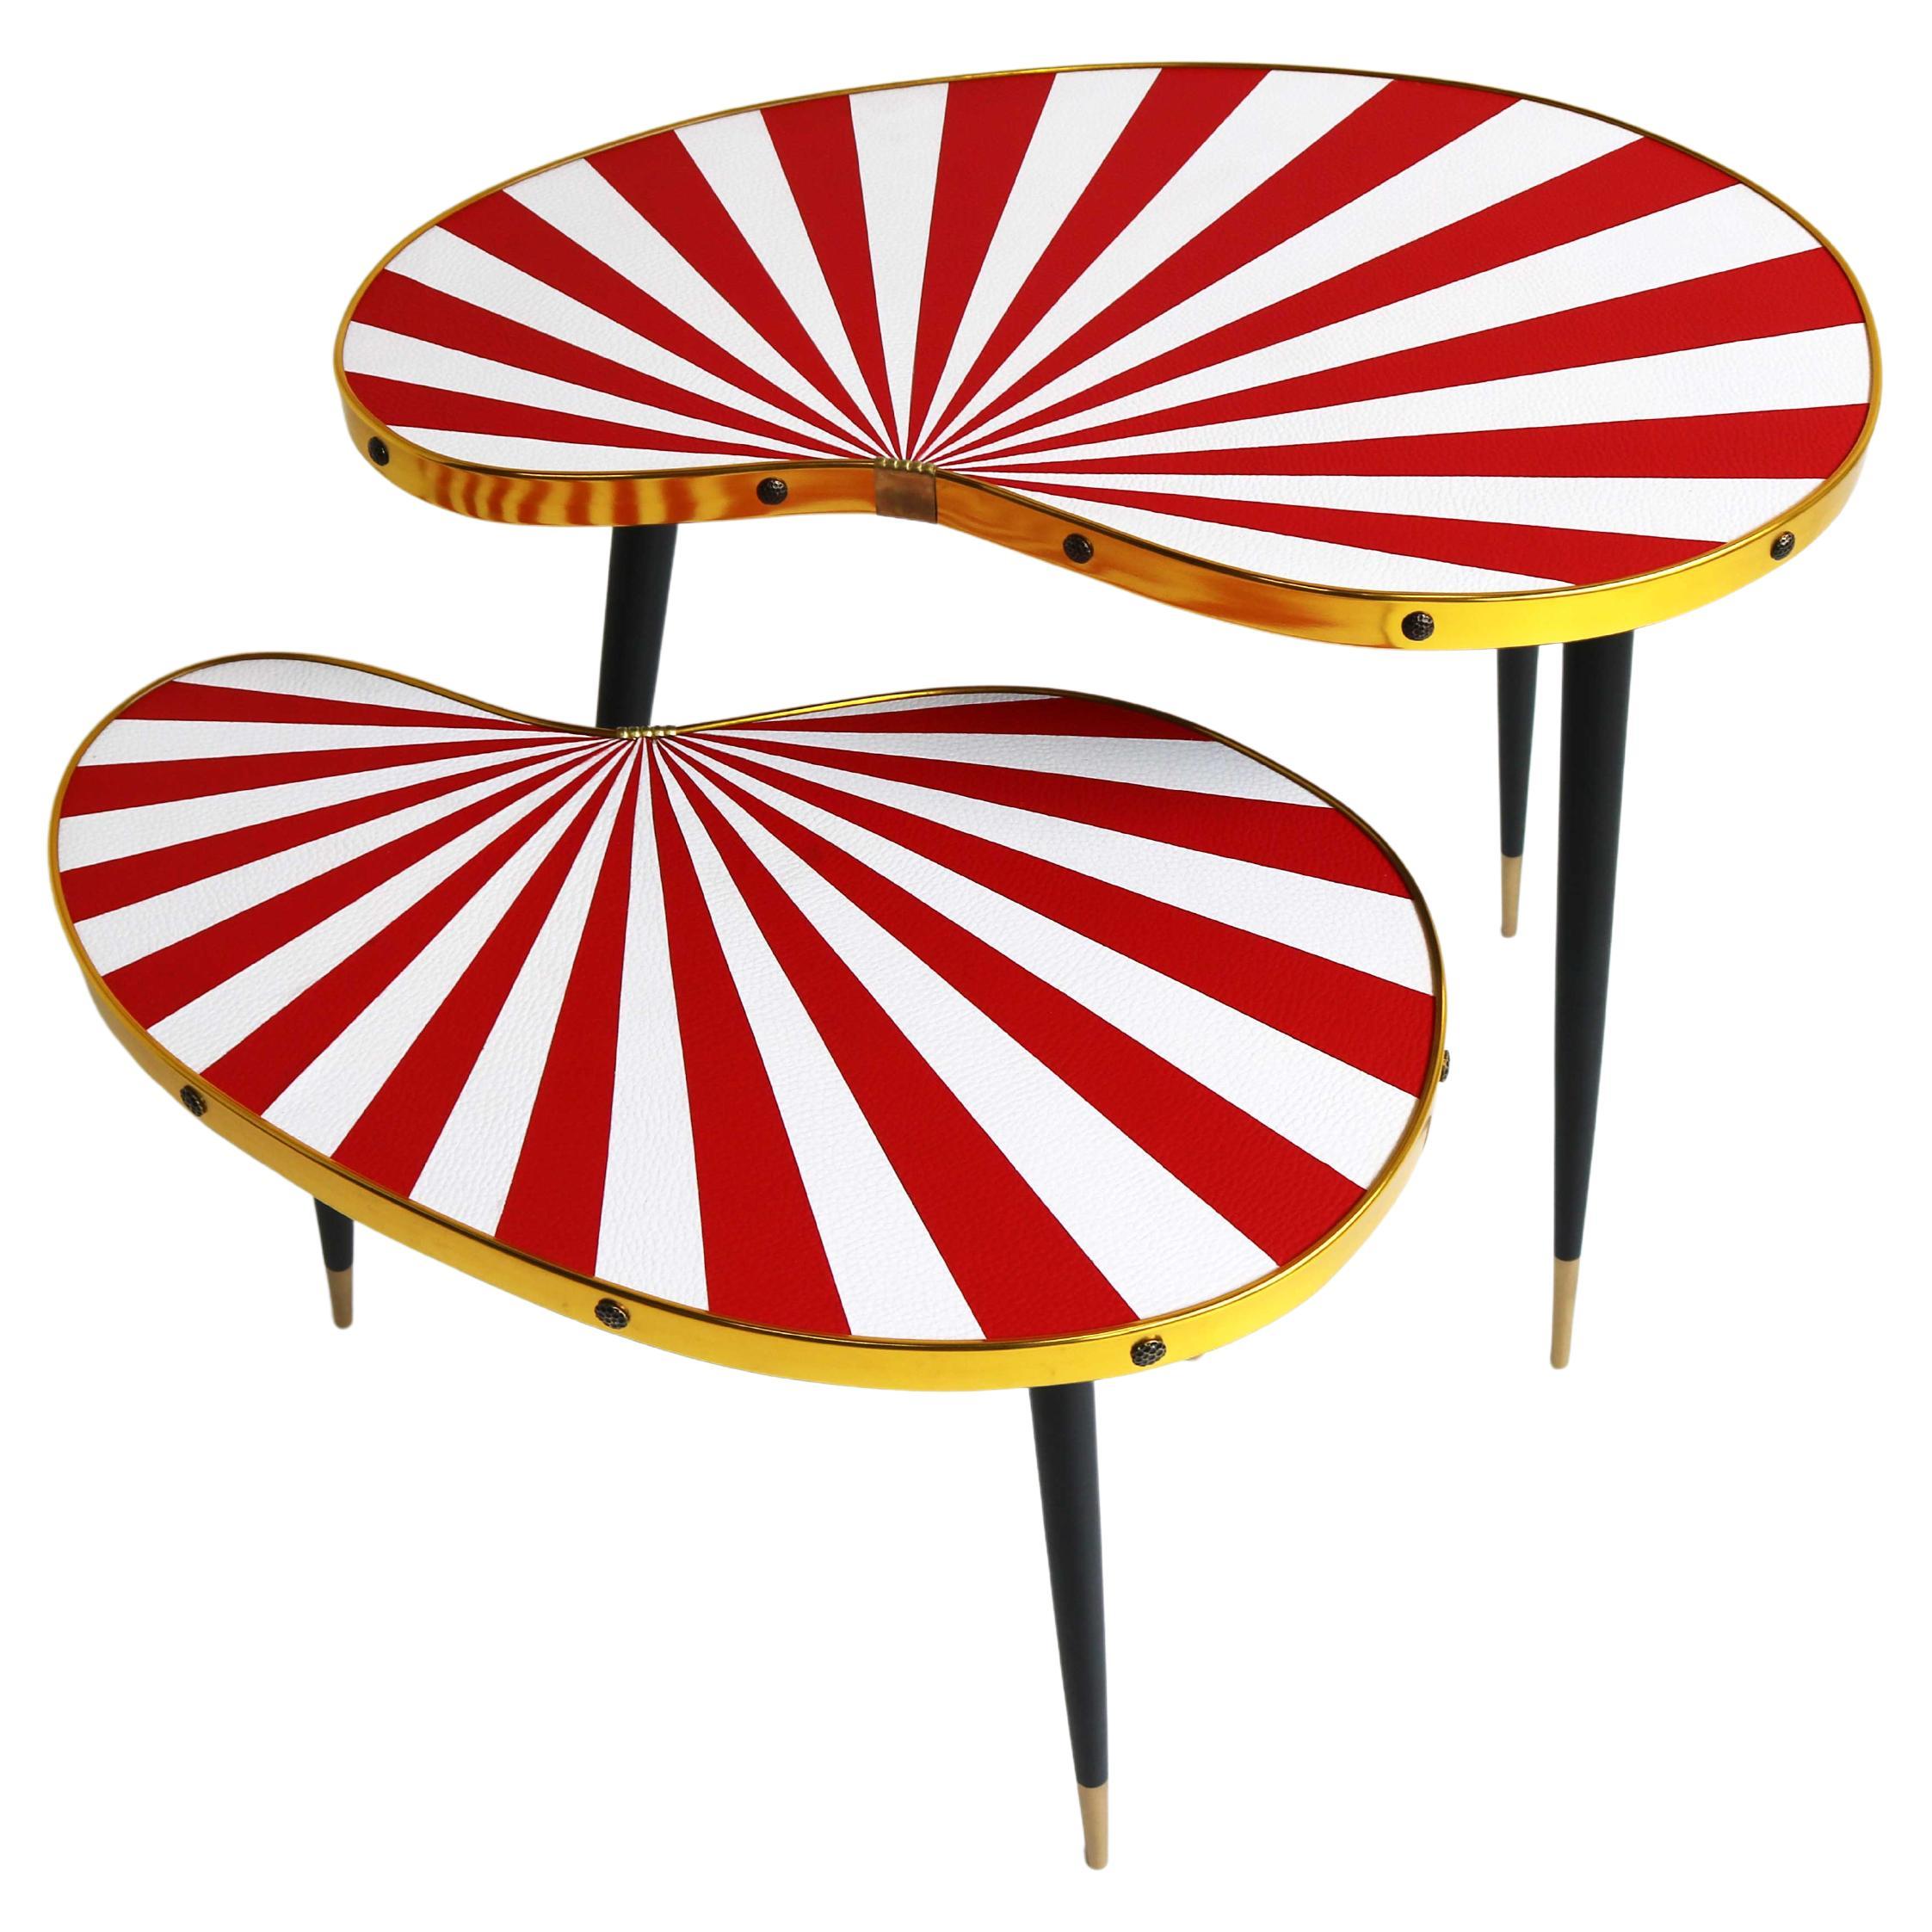 Pair Vintage side tables, set of plant tables 1950-1974

Couple of striking striped occasional tables.
German plants table set with red rays of sunlight.
Two Kidney shaped side tables, with elegant slender legs that gives the tables its